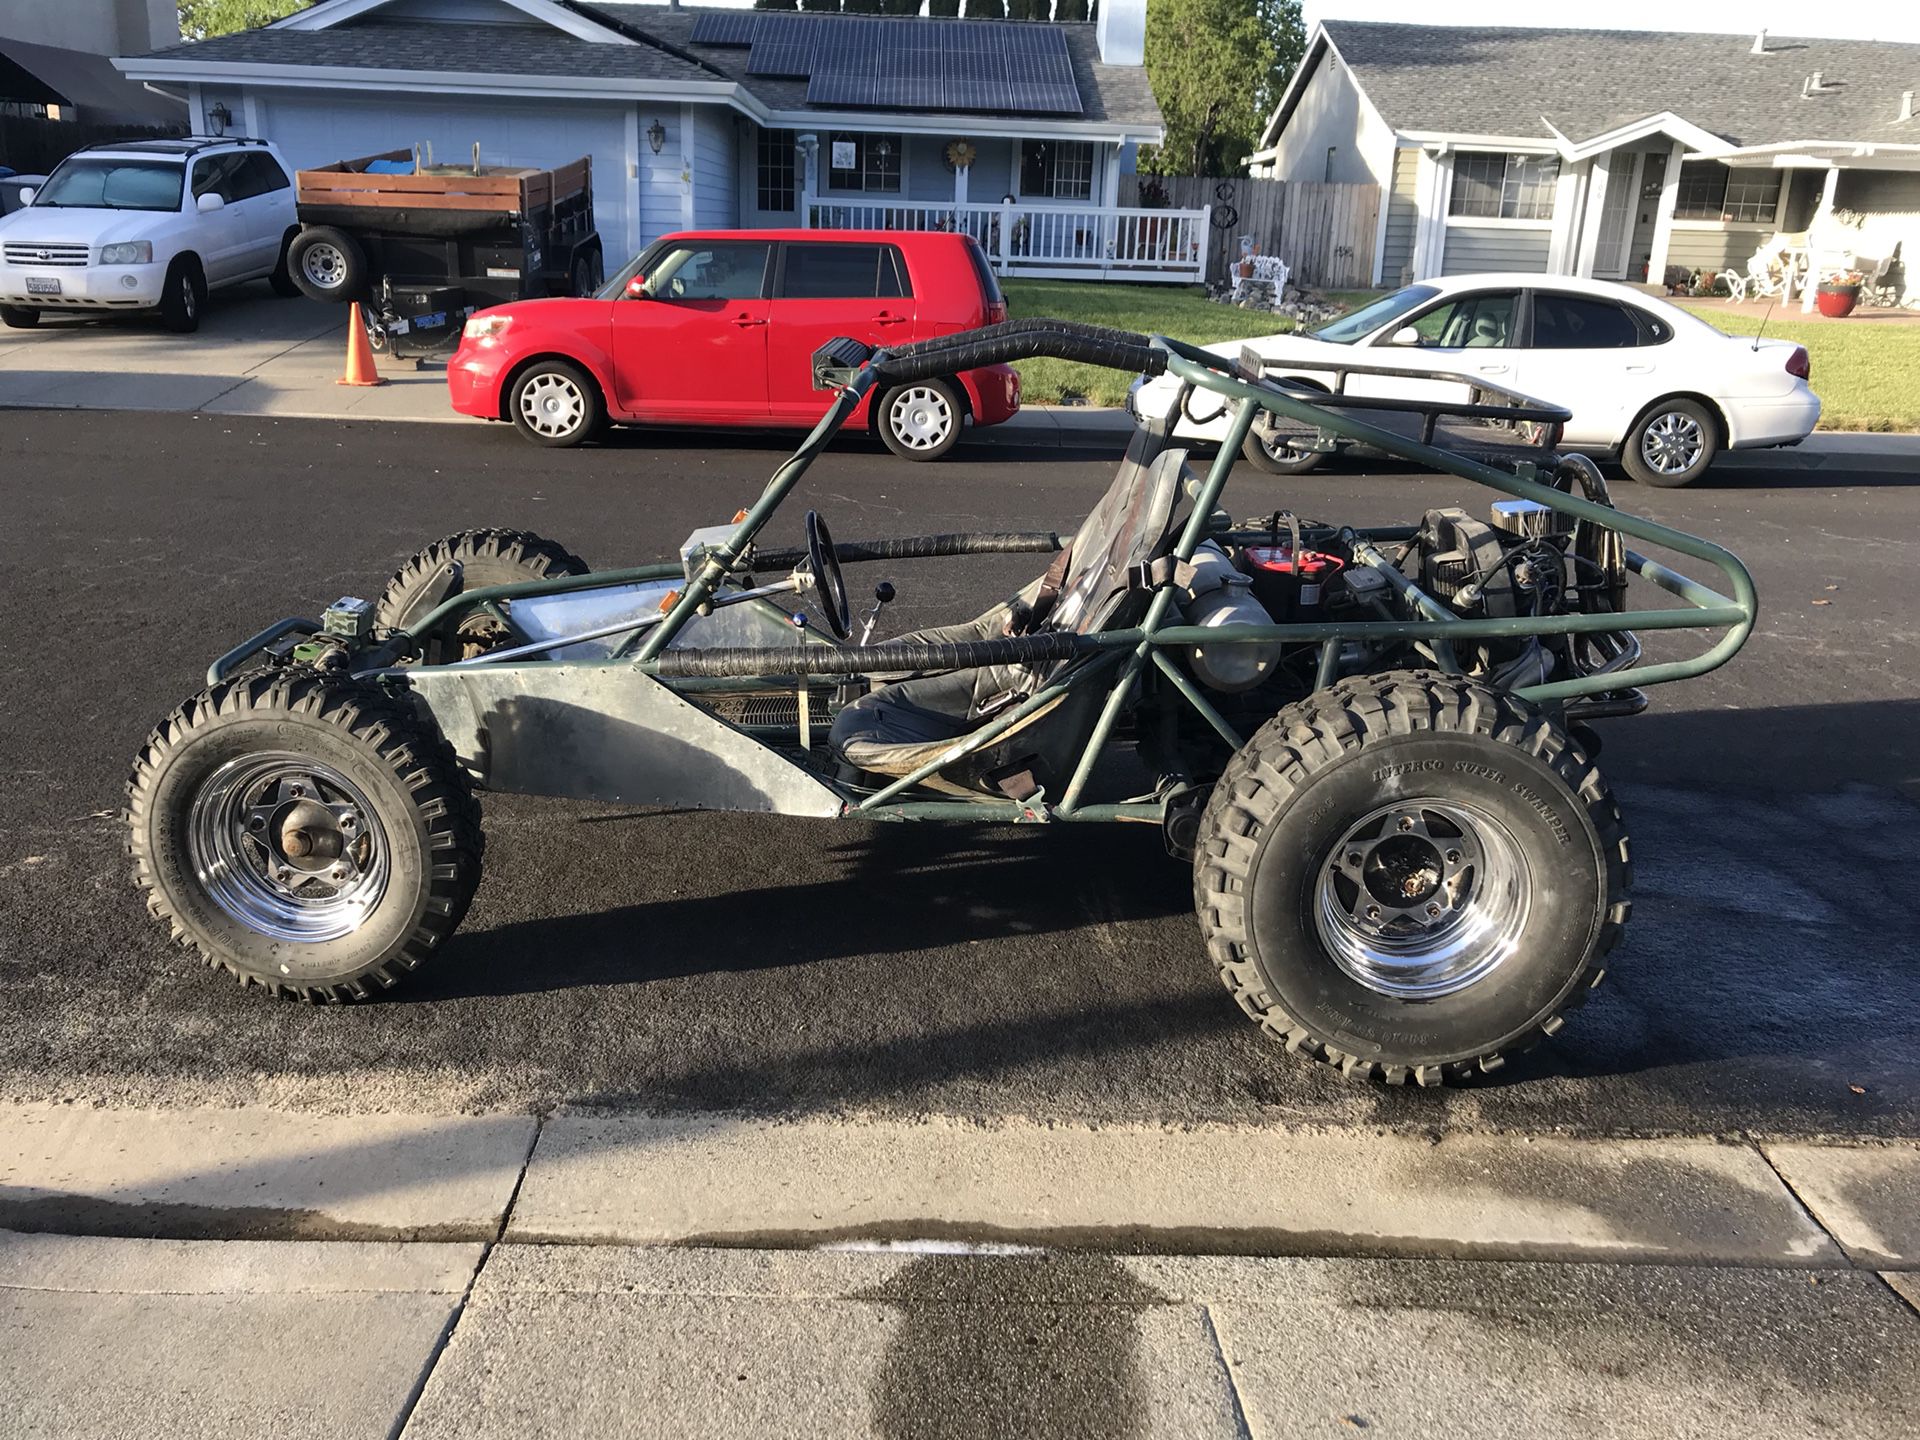 Rail Dune Buggy VW engine for Sale in Vacaville, CA - OfferUp